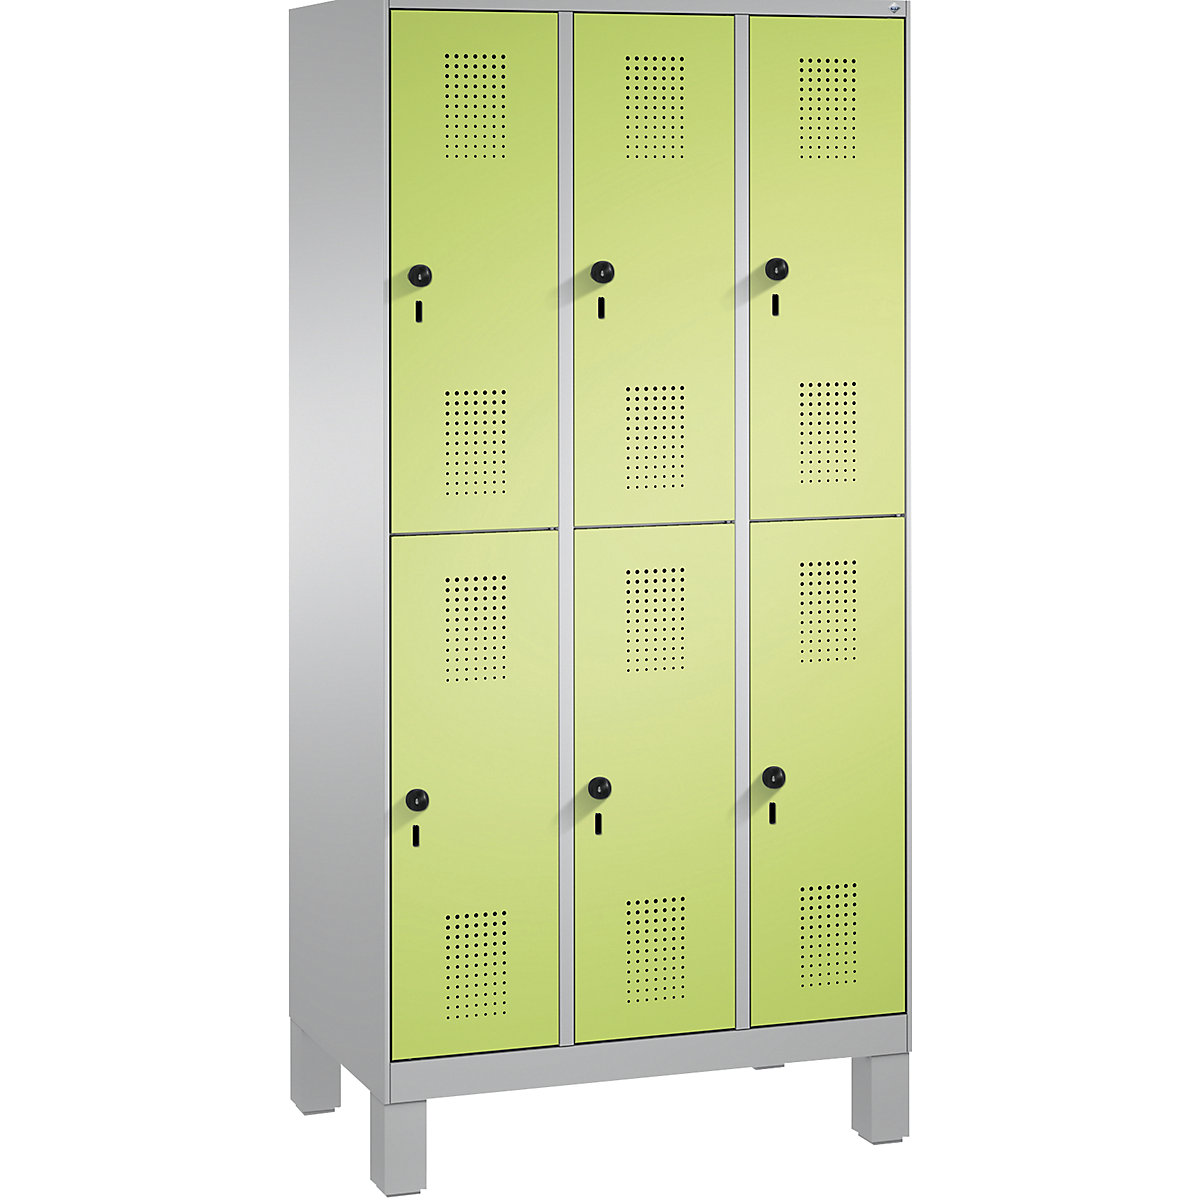 EVOLO cloakroom locker, double tier, with feet – C+P, 3 compartments, 2 shelf compartments each, compartment width 300 mm, white aluminium / viridian green-4